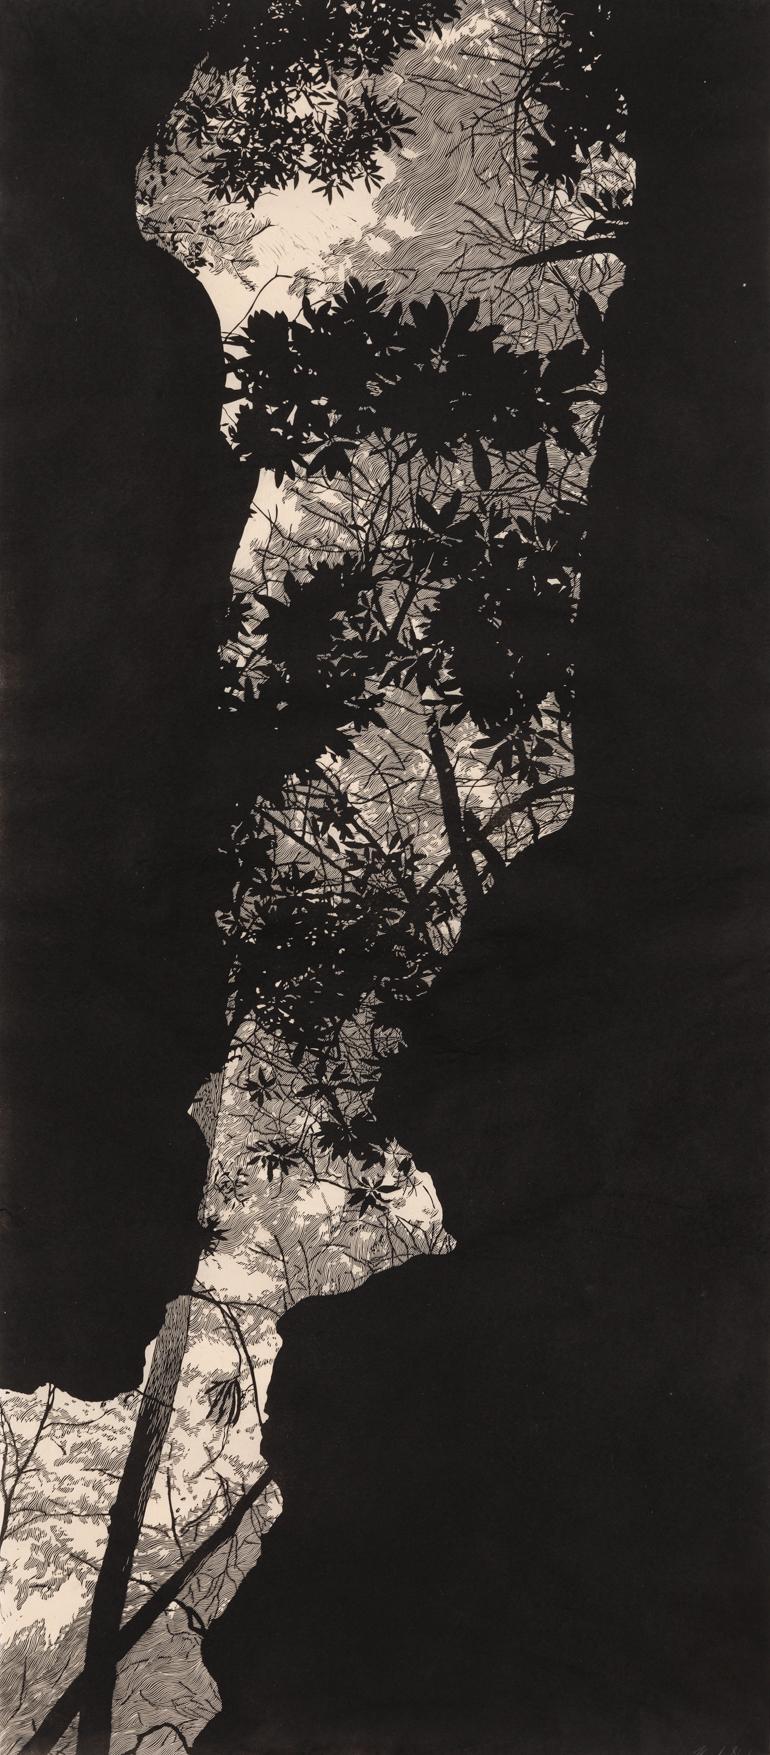 Canopy River - Linocut Print in Black and White of Forest Through Rocky Crevice